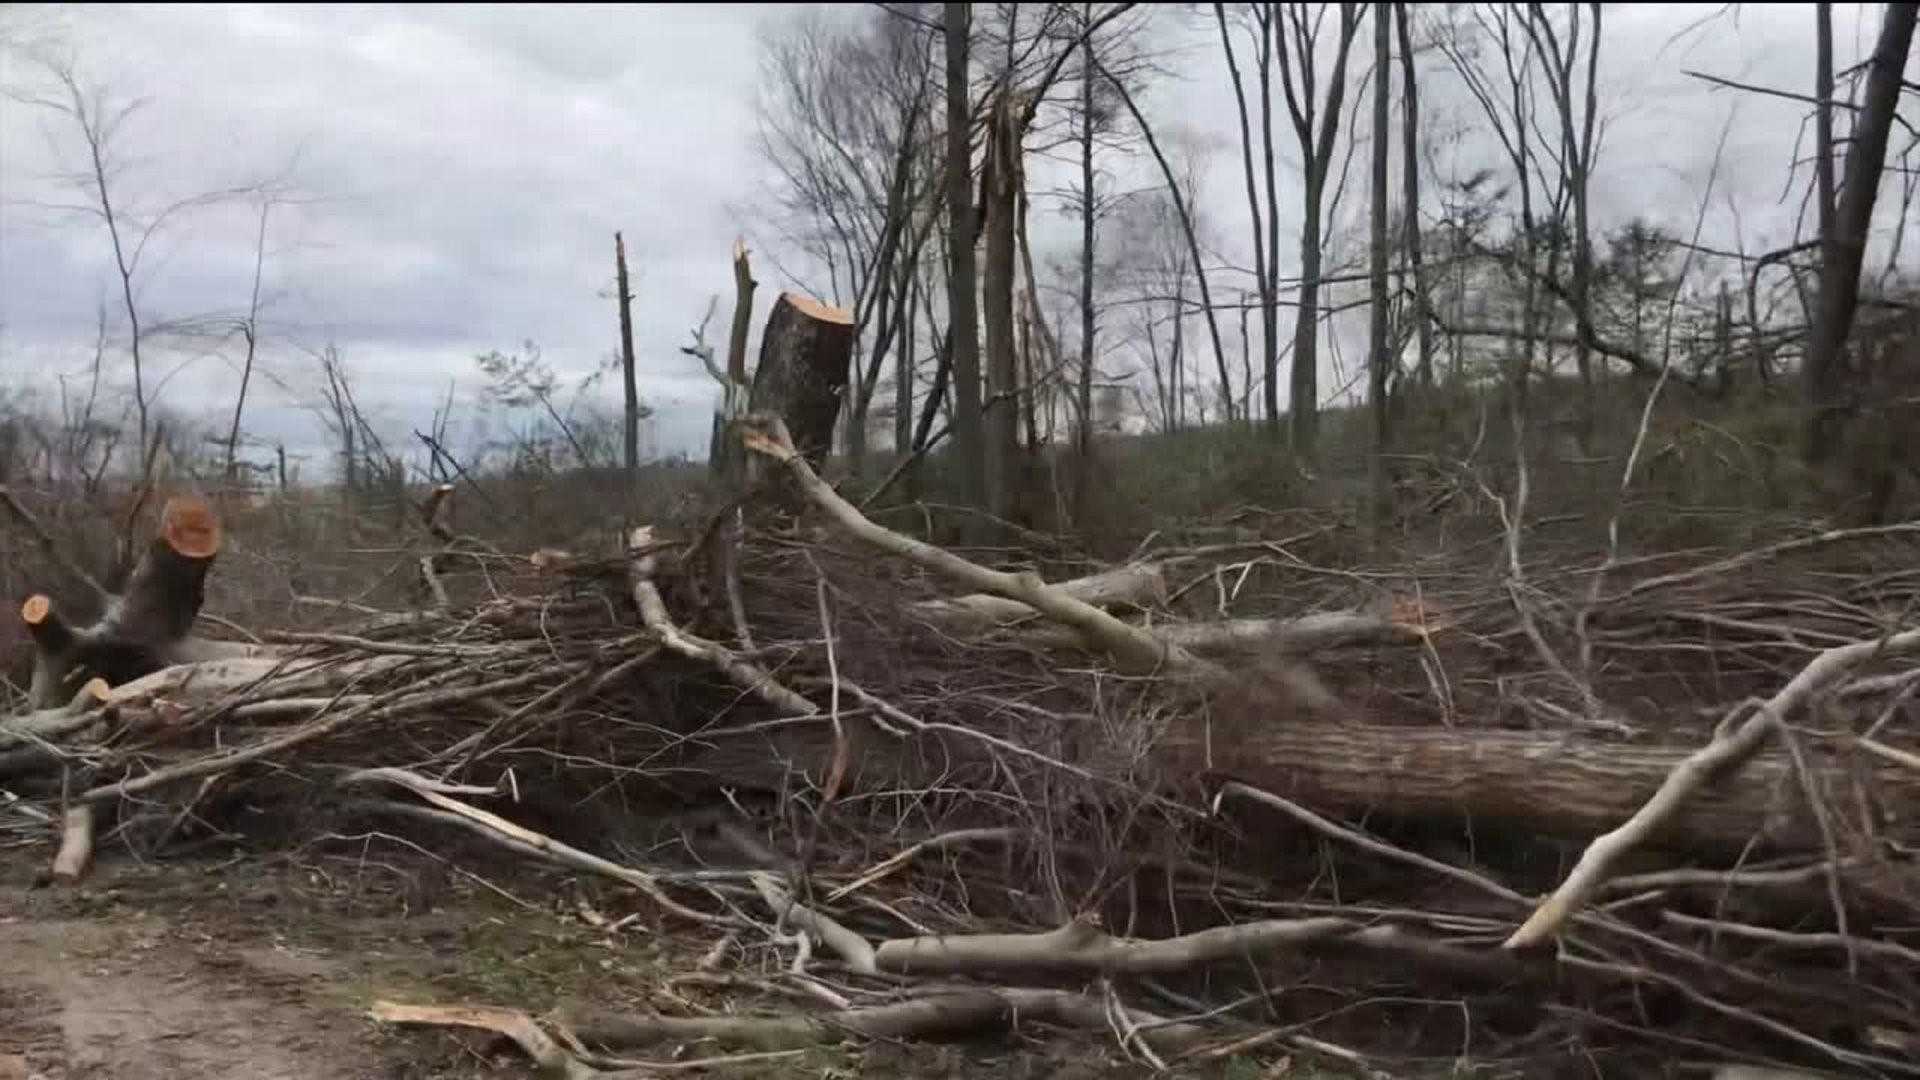 Picking Up the Pieces of Golf Course Ruined by Tornado